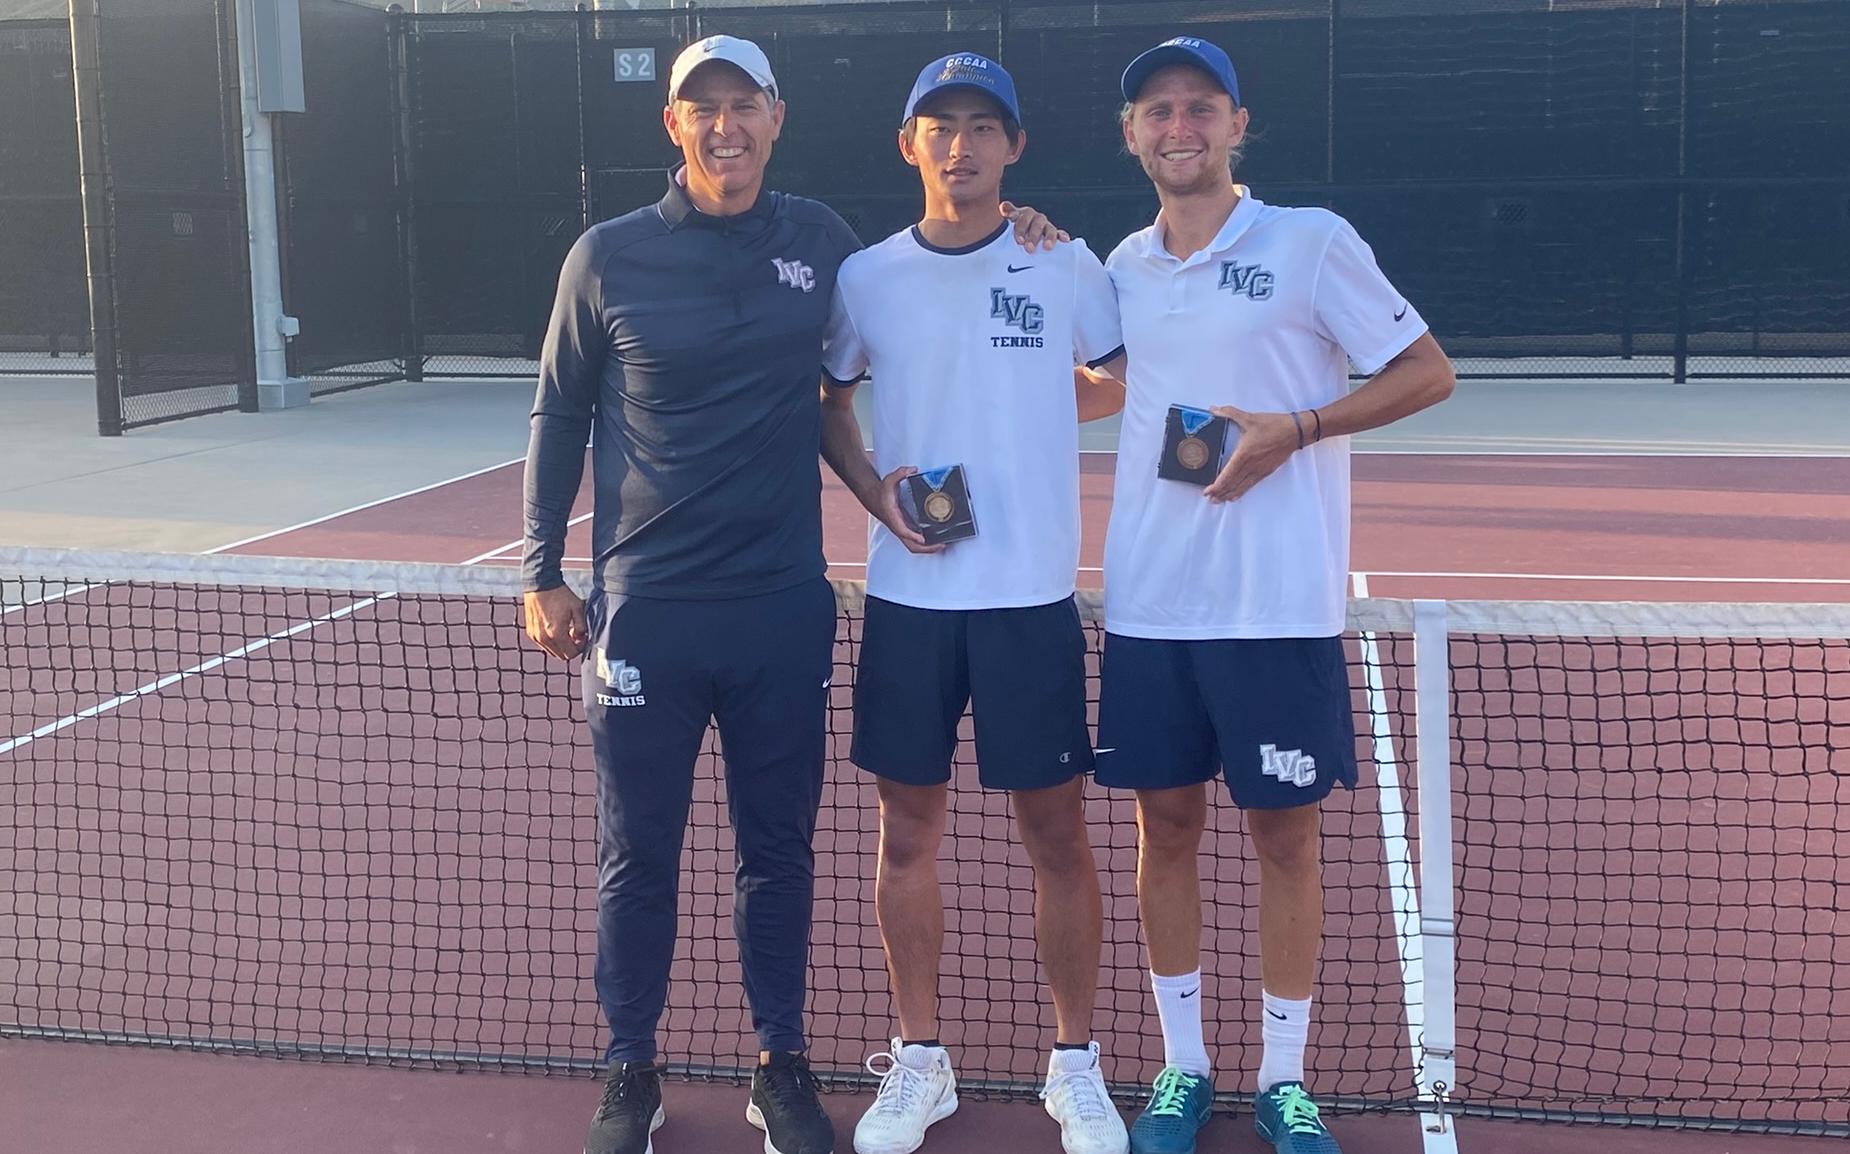 Irvine Valley's Bellegy doubles up on CCCAA state tennis titles